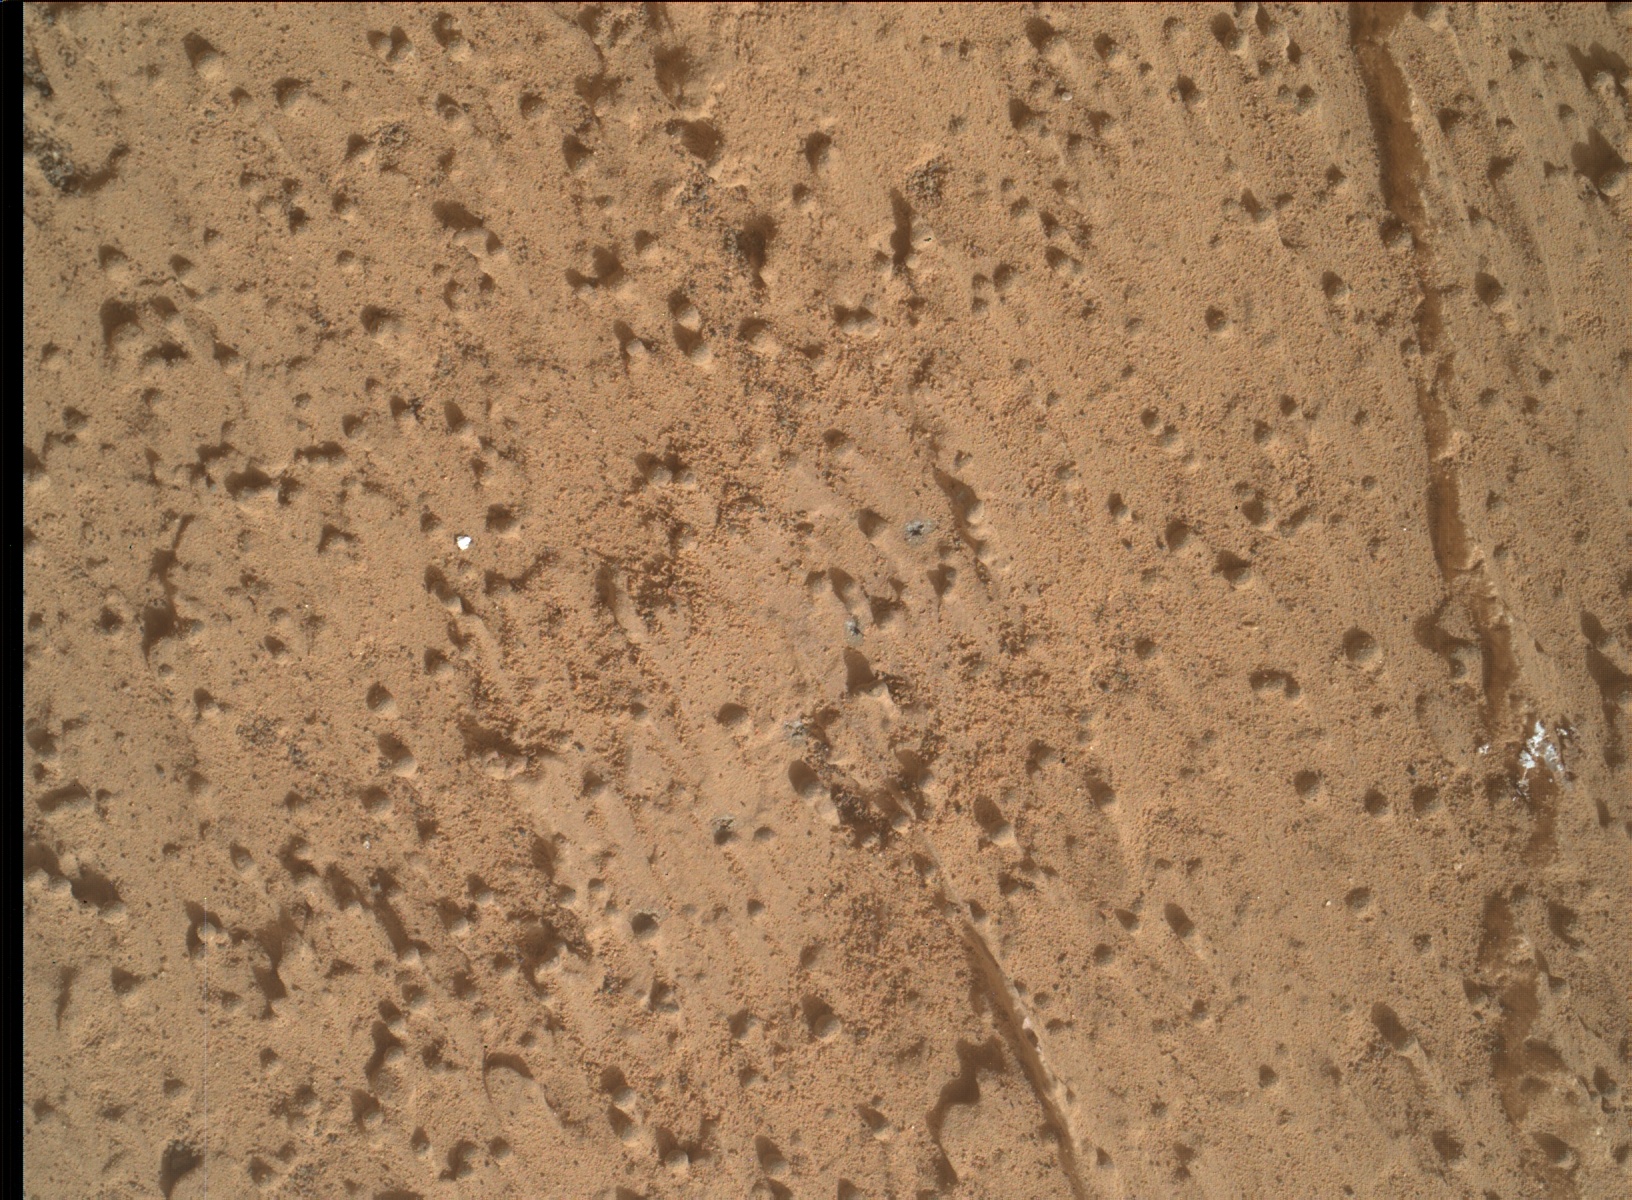 Nasa's Mars rover Curiosity acquired this image using its Mars Hand Lens Imager (MAHLI) on Sol 3387